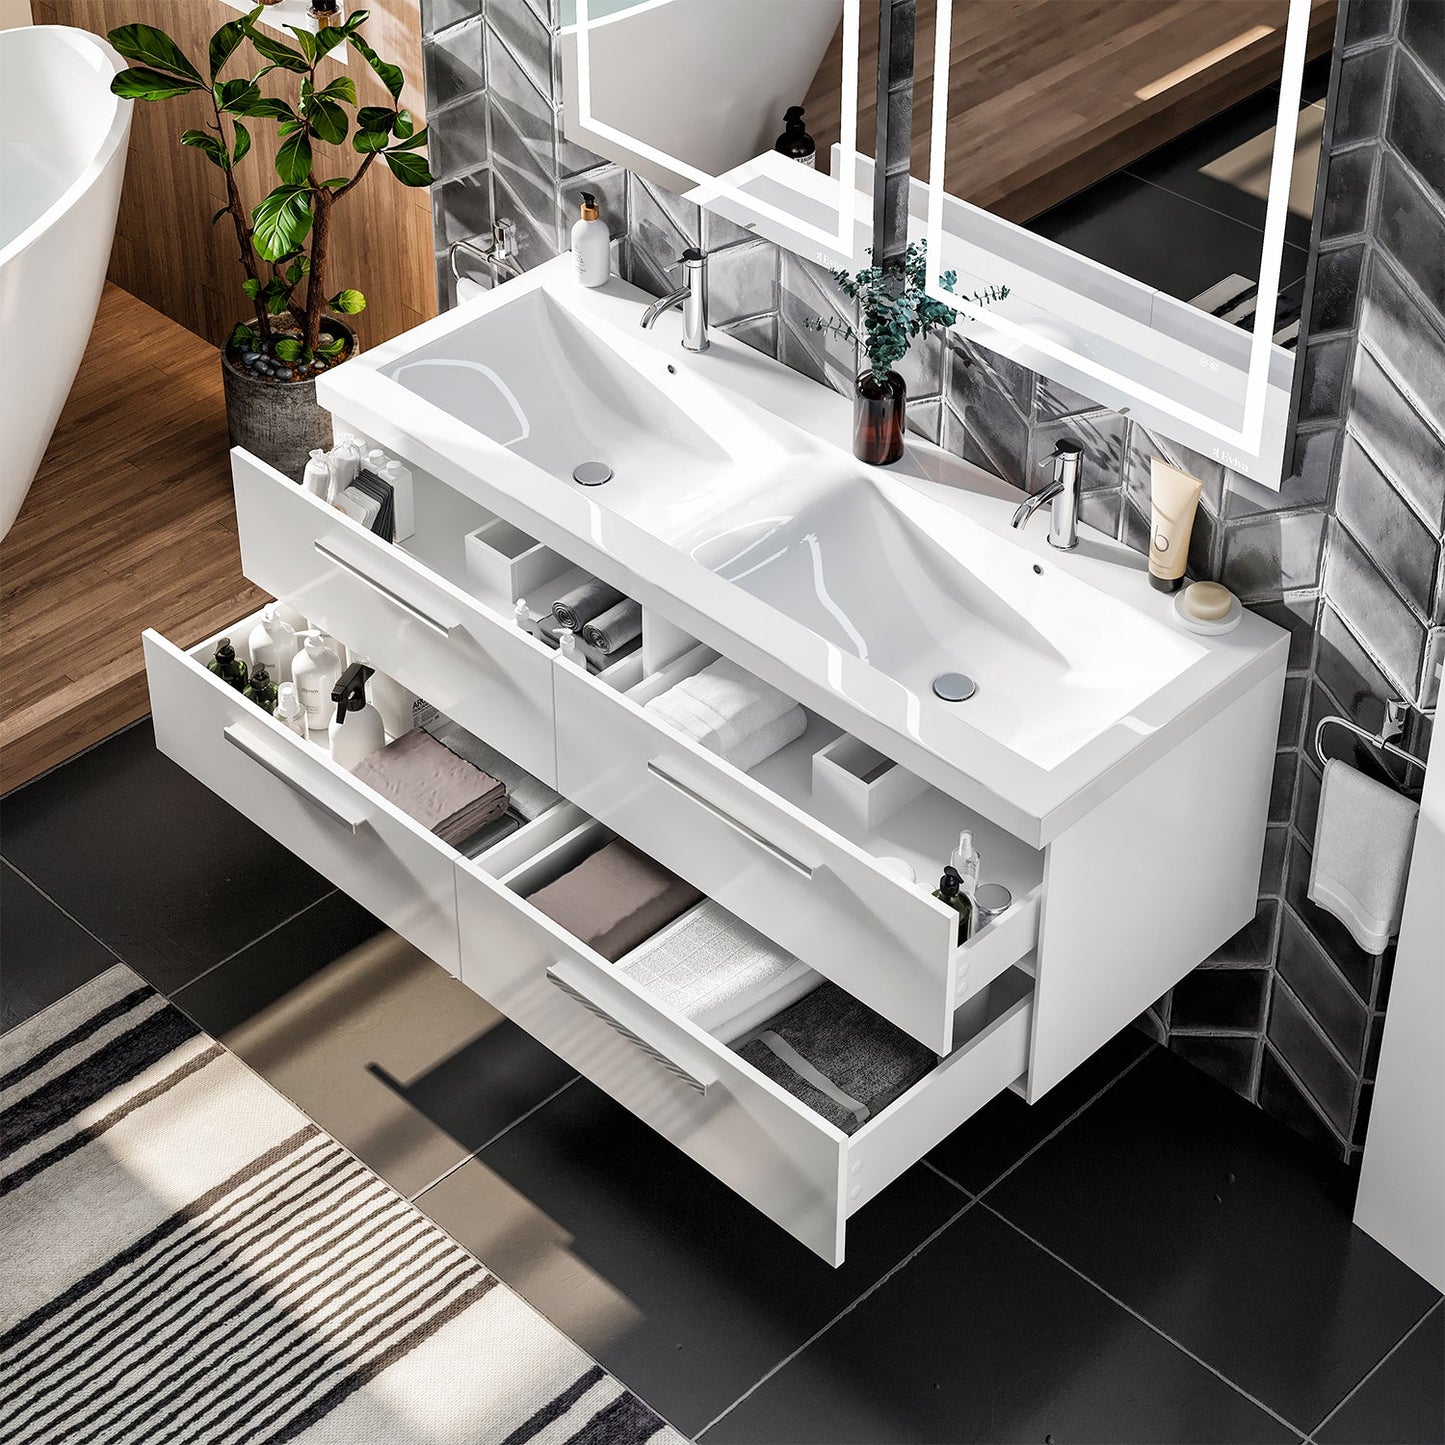 Surf 57"W x 20"D White Double Sink Bathroom Vanity with Acrylic Countertop and Integrated Sink